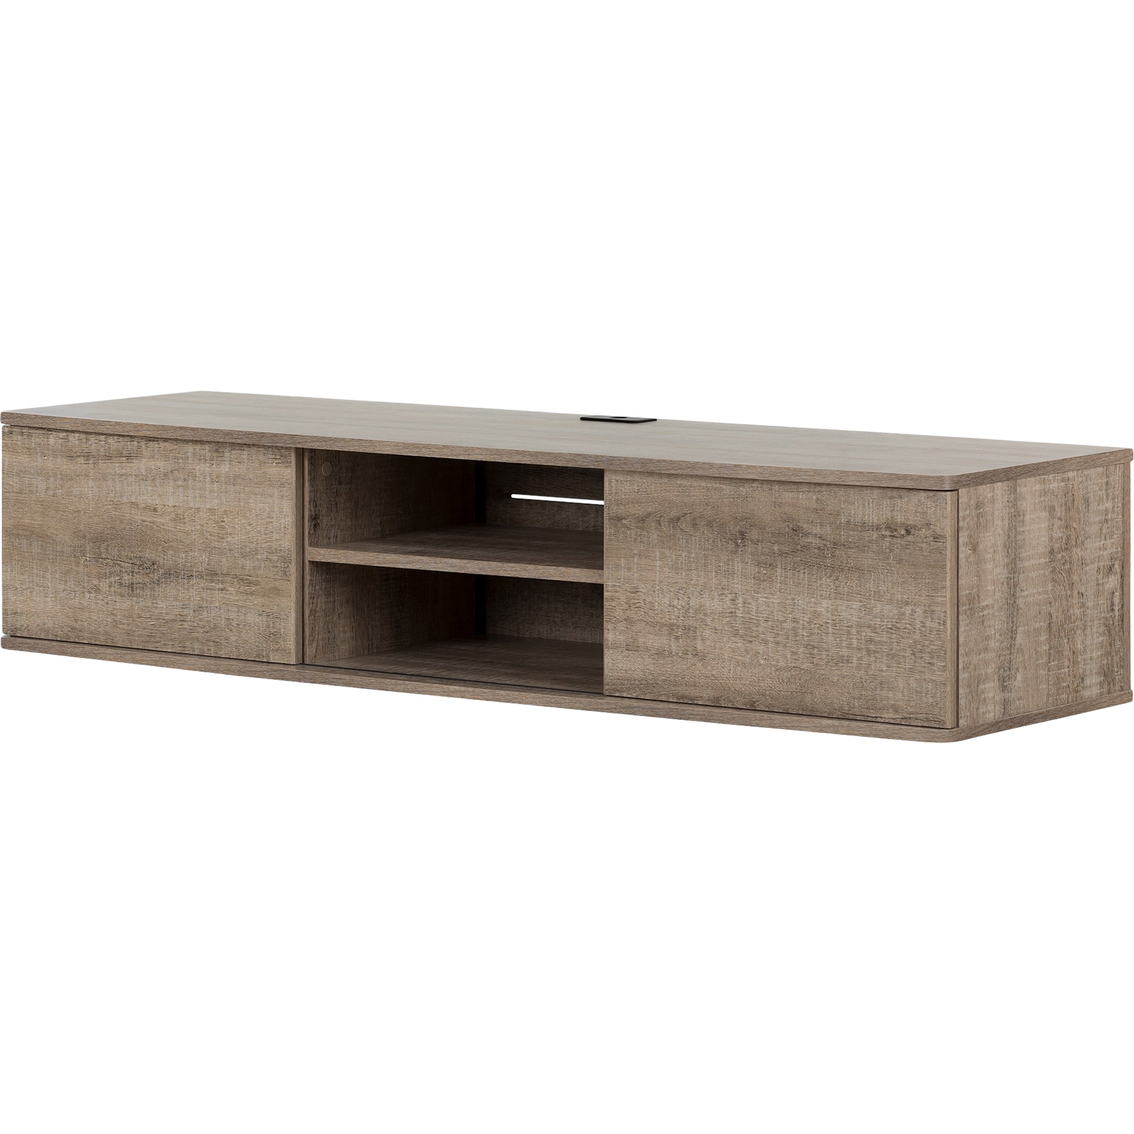 South Shore Agora 56 in. Wall Mounted Media Console - Image 2 of 7